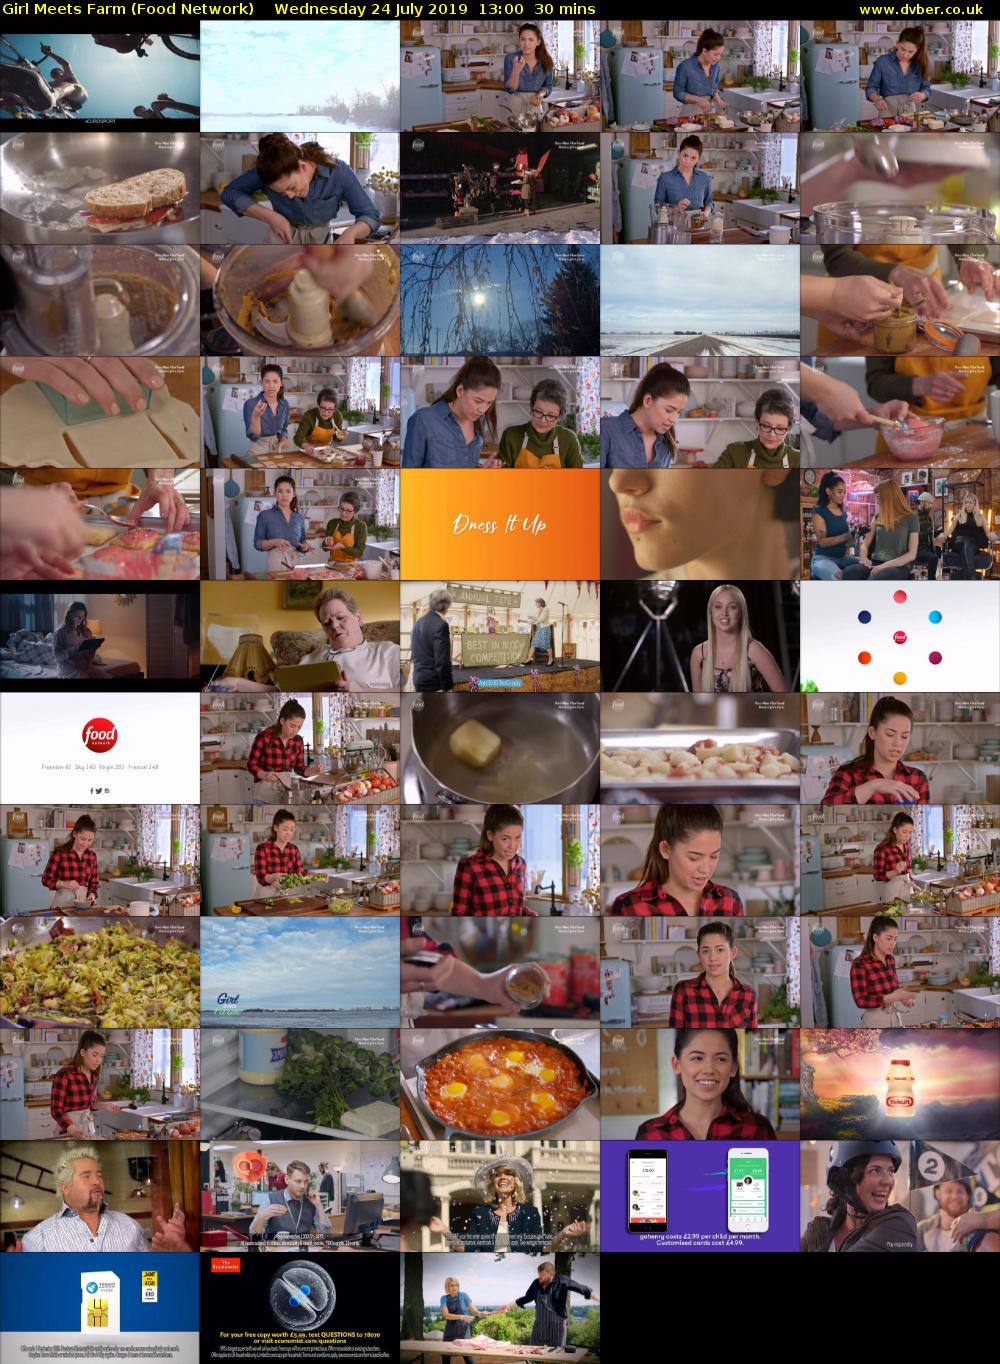 Girl Meets Farm (Food Network) Wednesday 24 July 2019 13:00 - 13:30